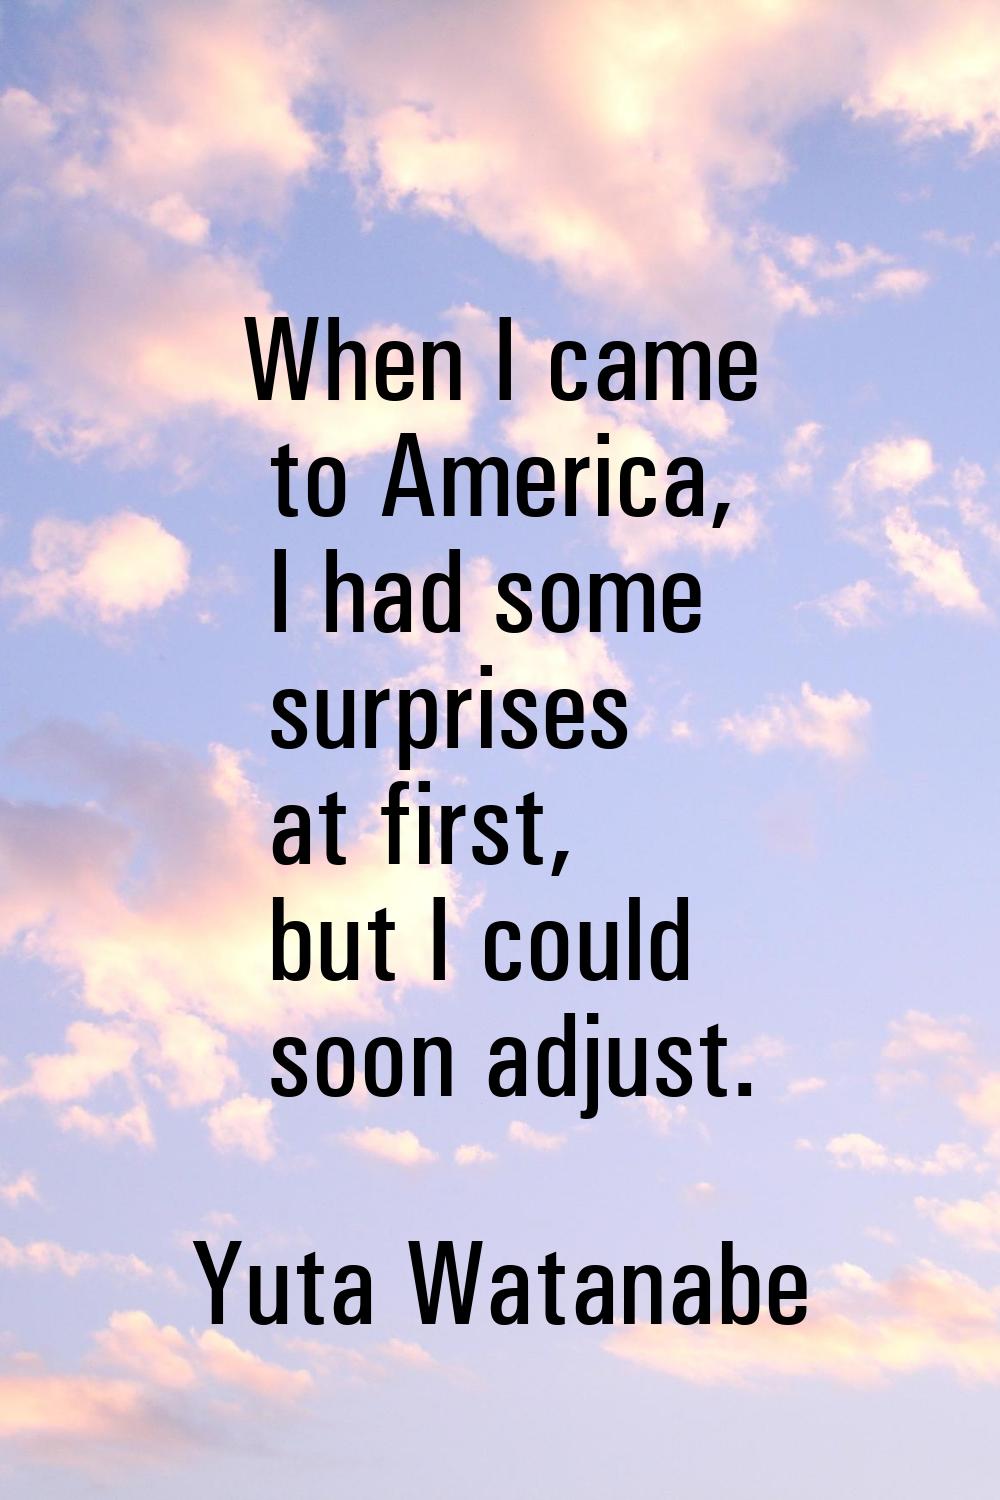 When I came to America, I had some surprises at first, but I could soon adjust.